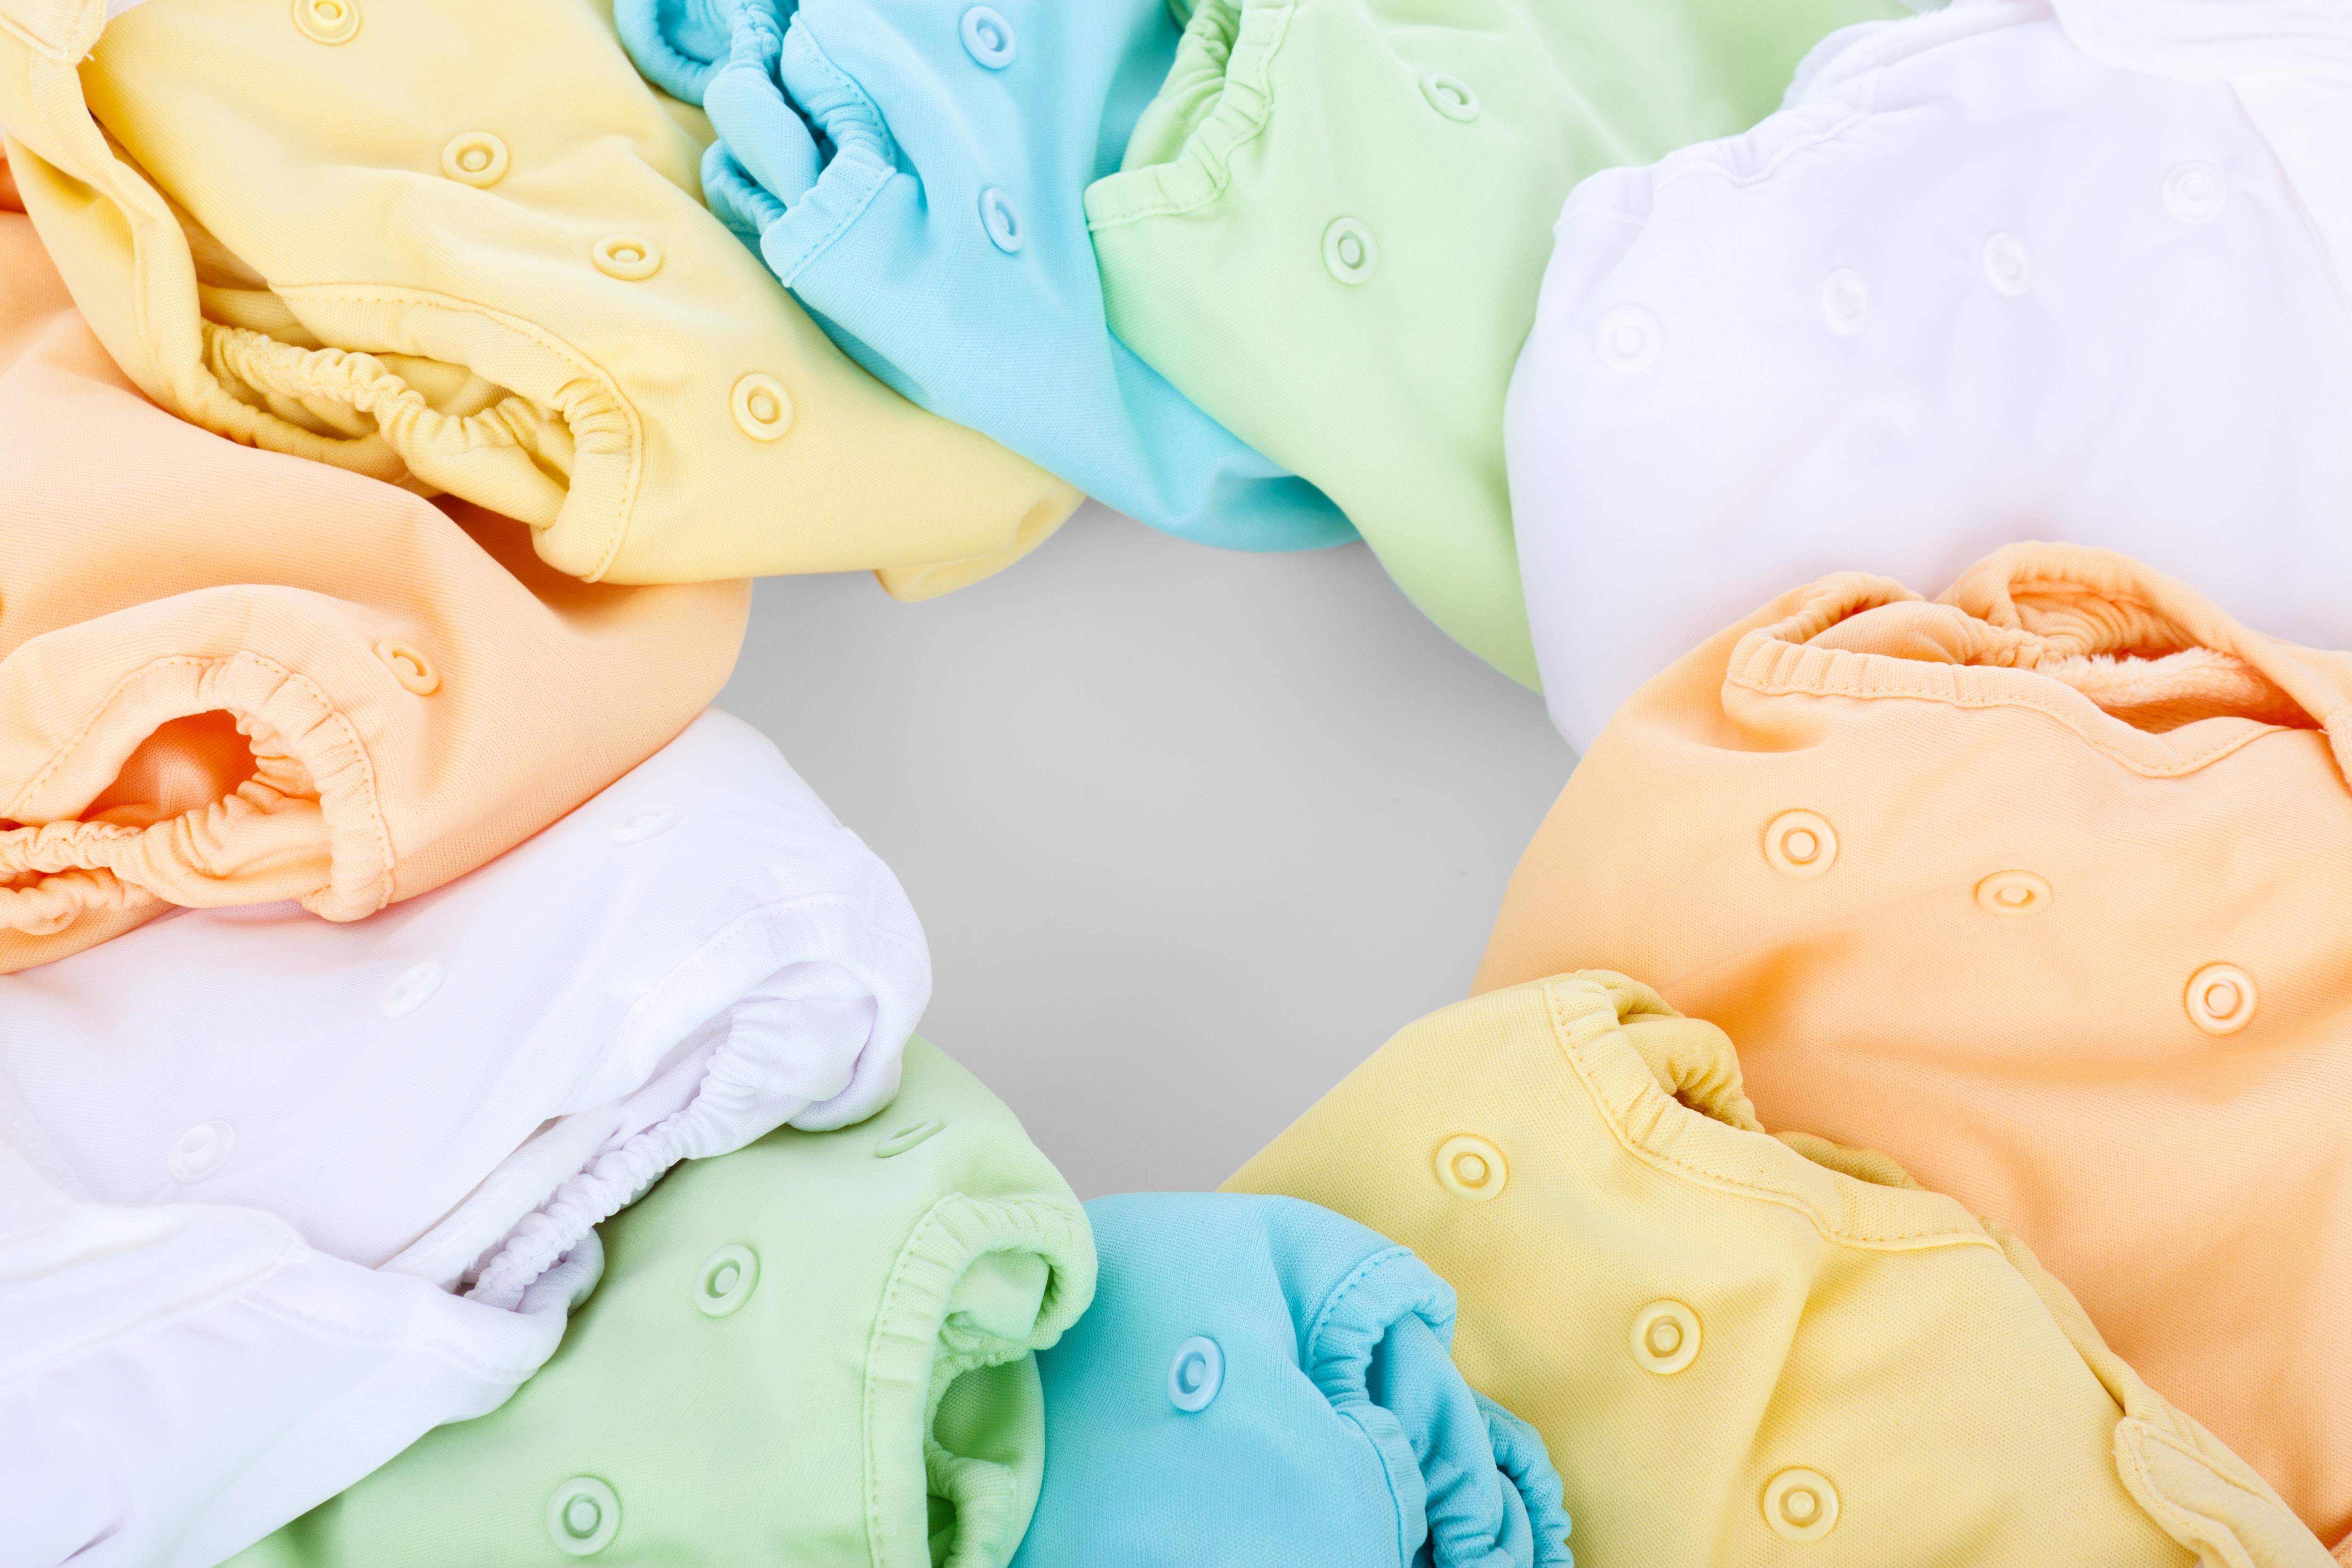 basic cloth diapers